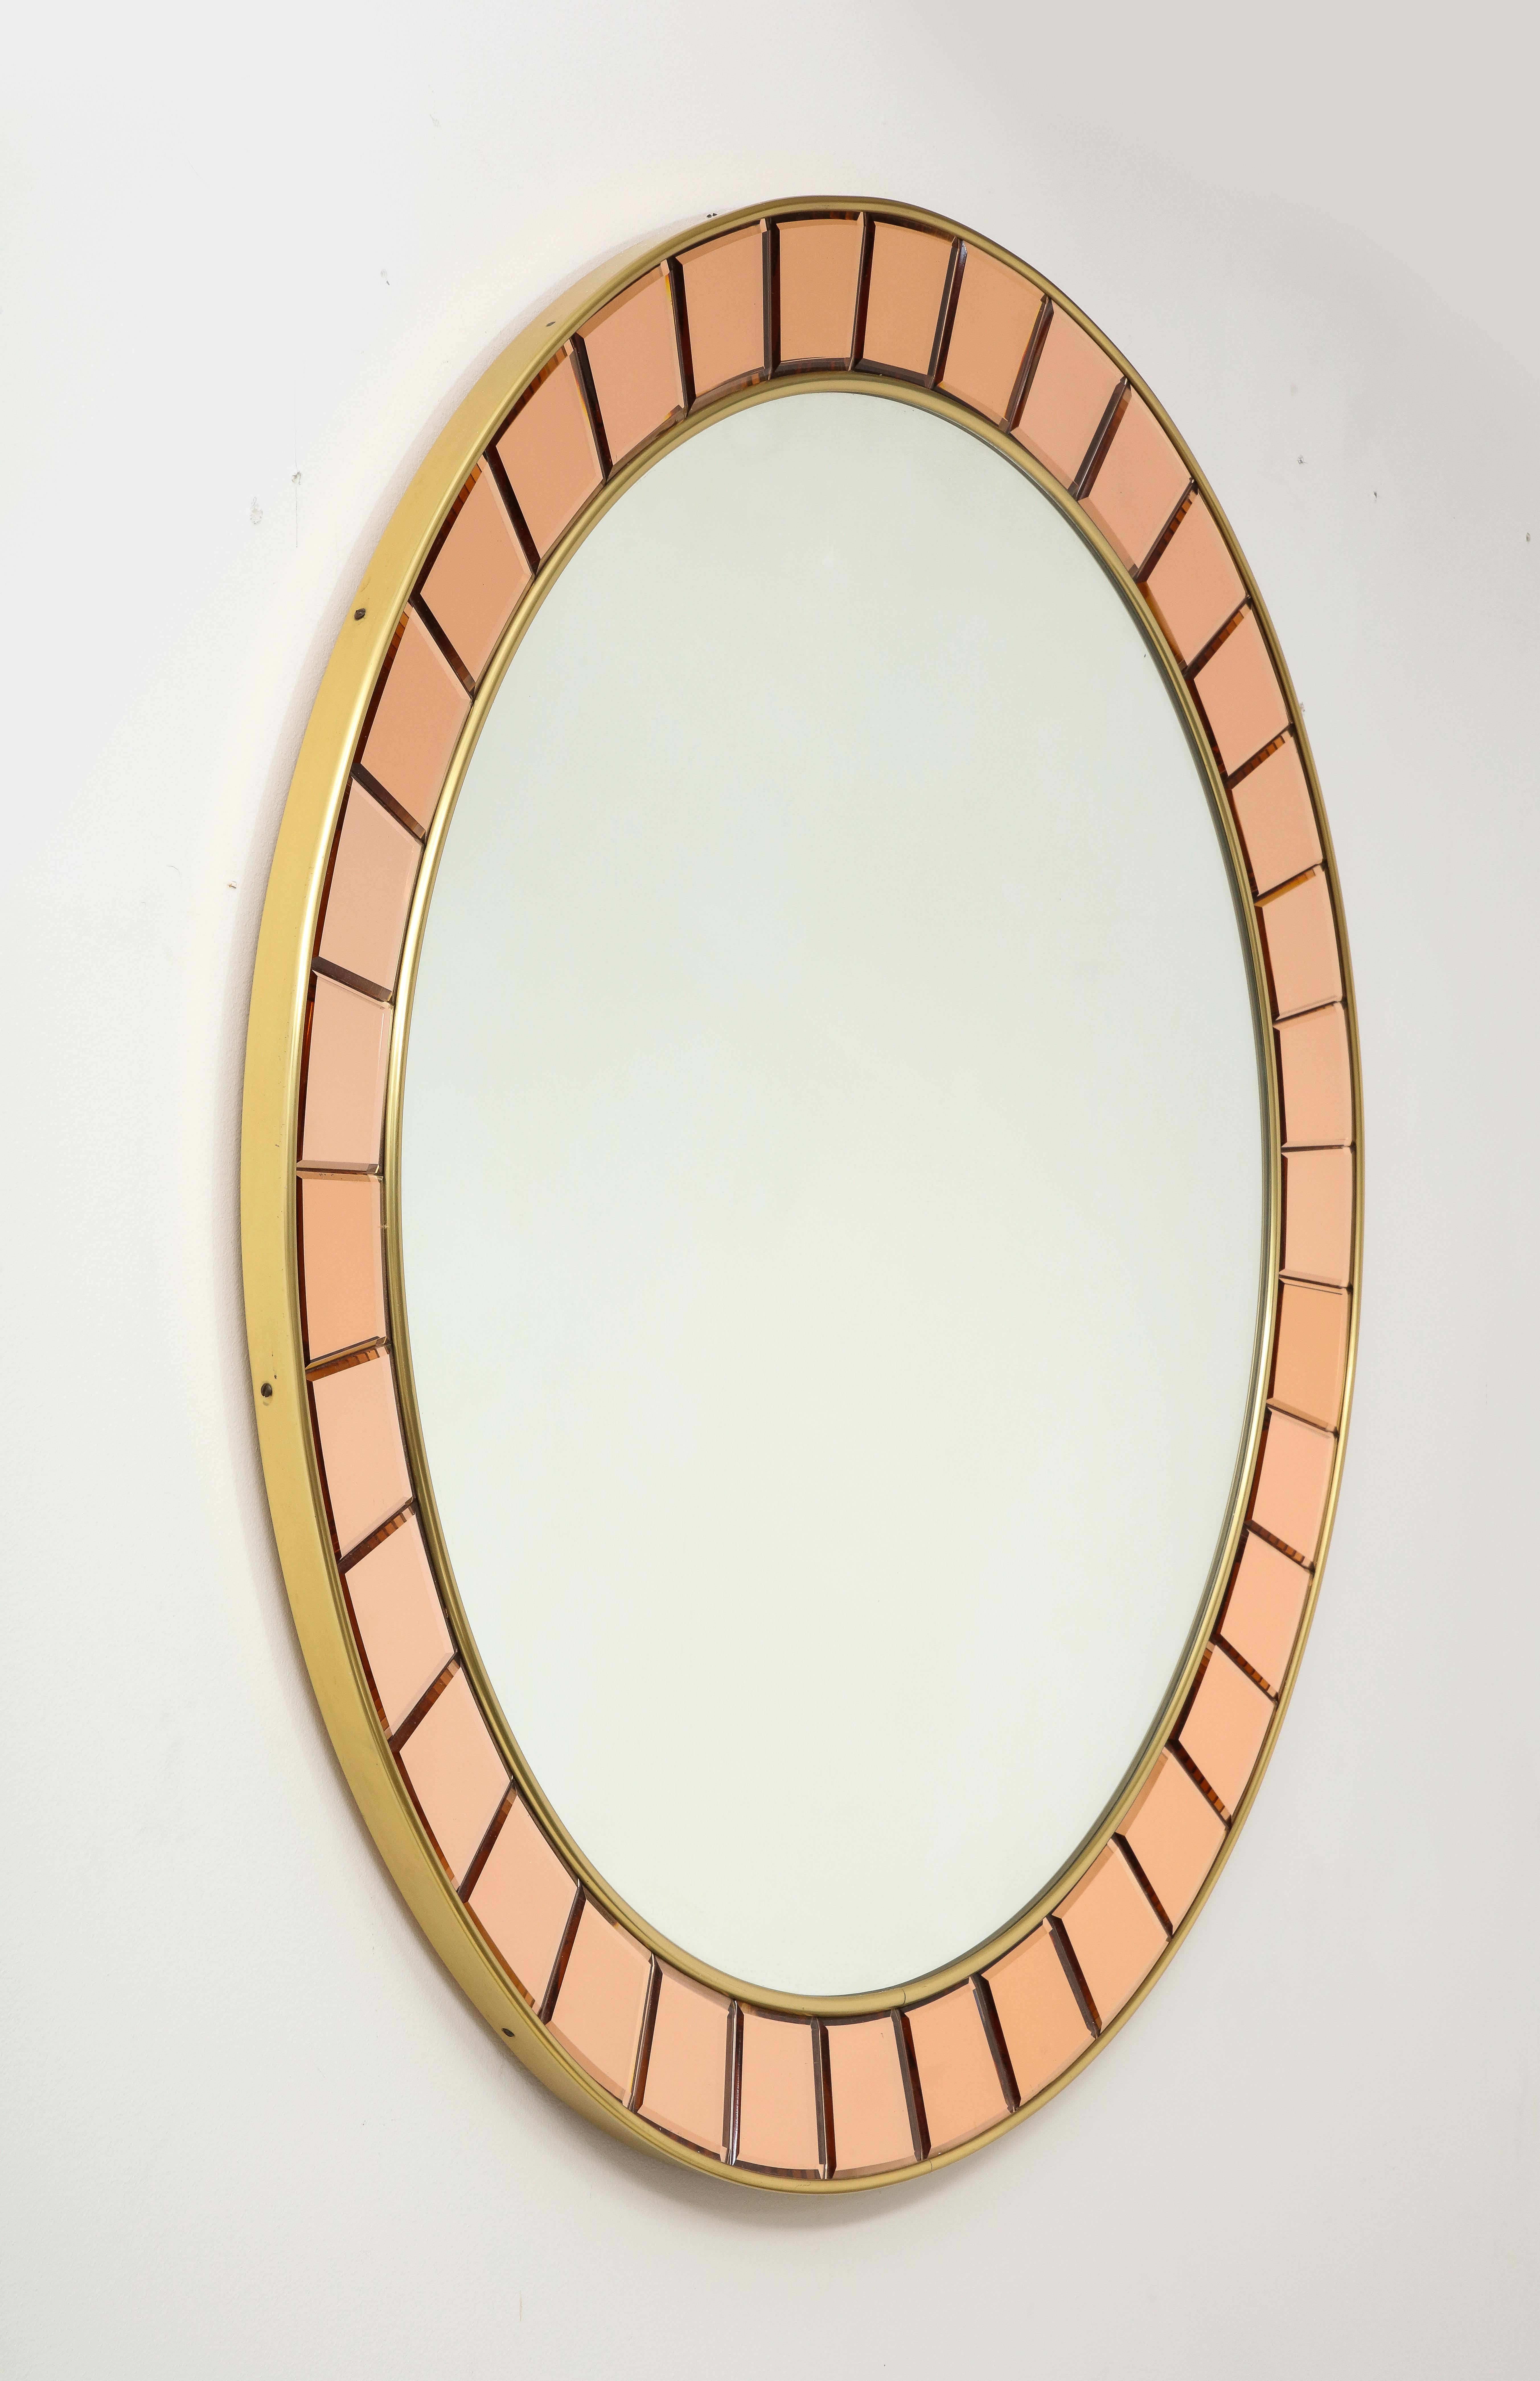 Cristal Art important and elegant large circular mirror model 2679 with hand-cut, beveled crystal glass pieces framed by gilt brass borders and mirrored glass on a wooden backing. The color of the faceted glass is an exquisite rose which is